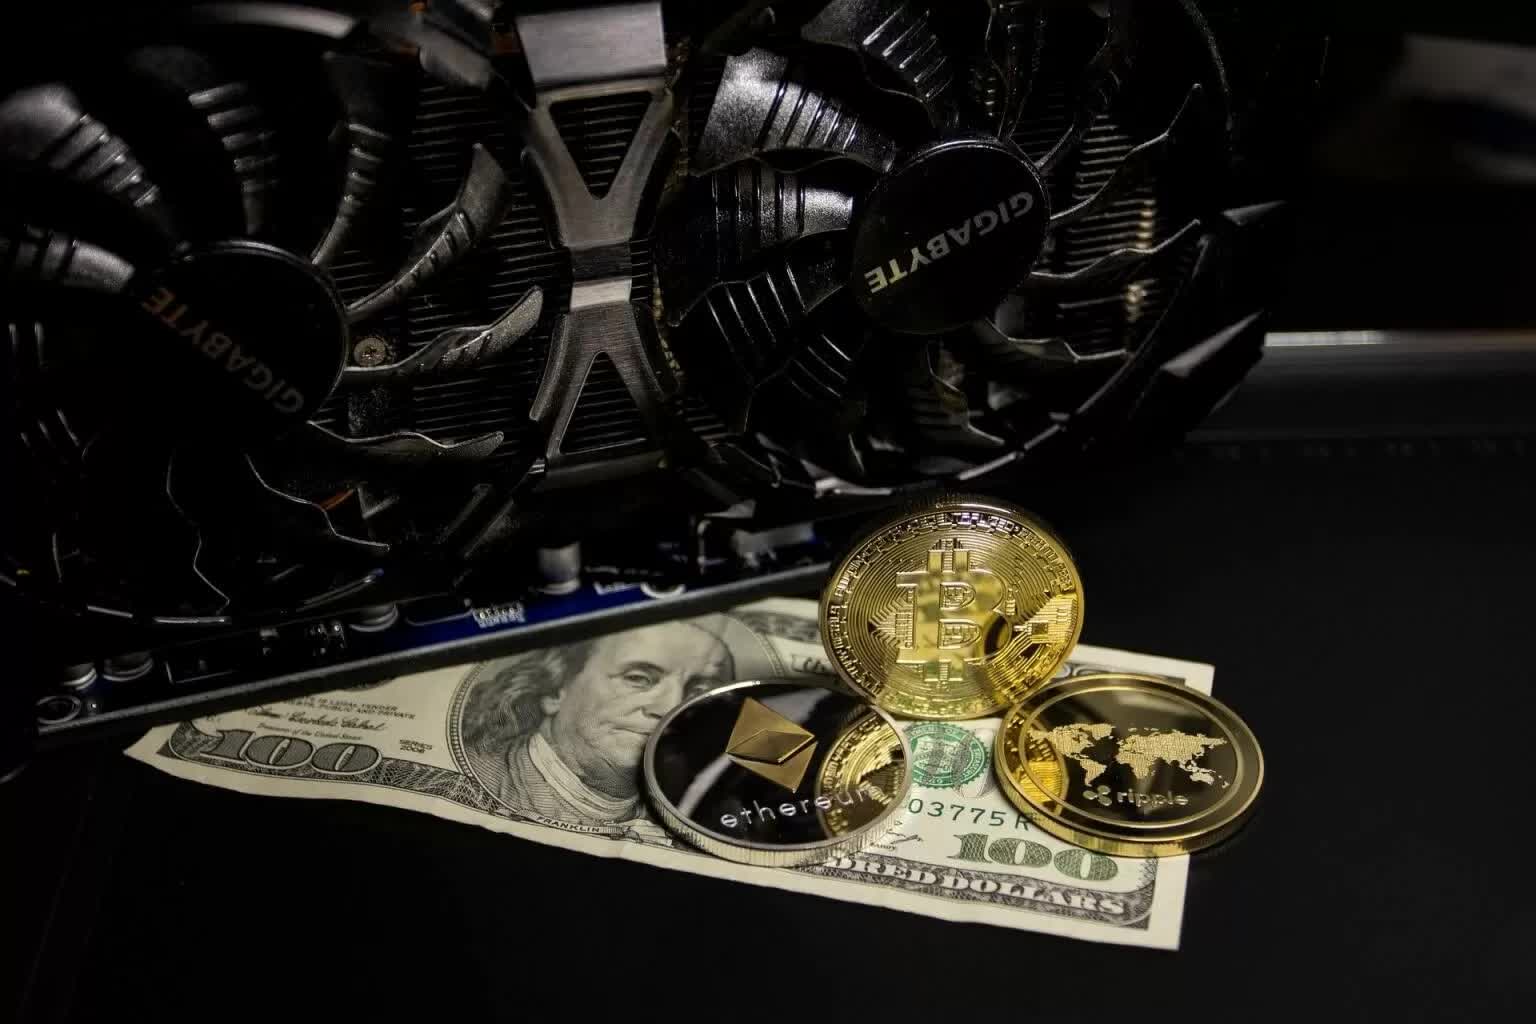 Analyst: buying a high-end graphics card for mining would be very foolish